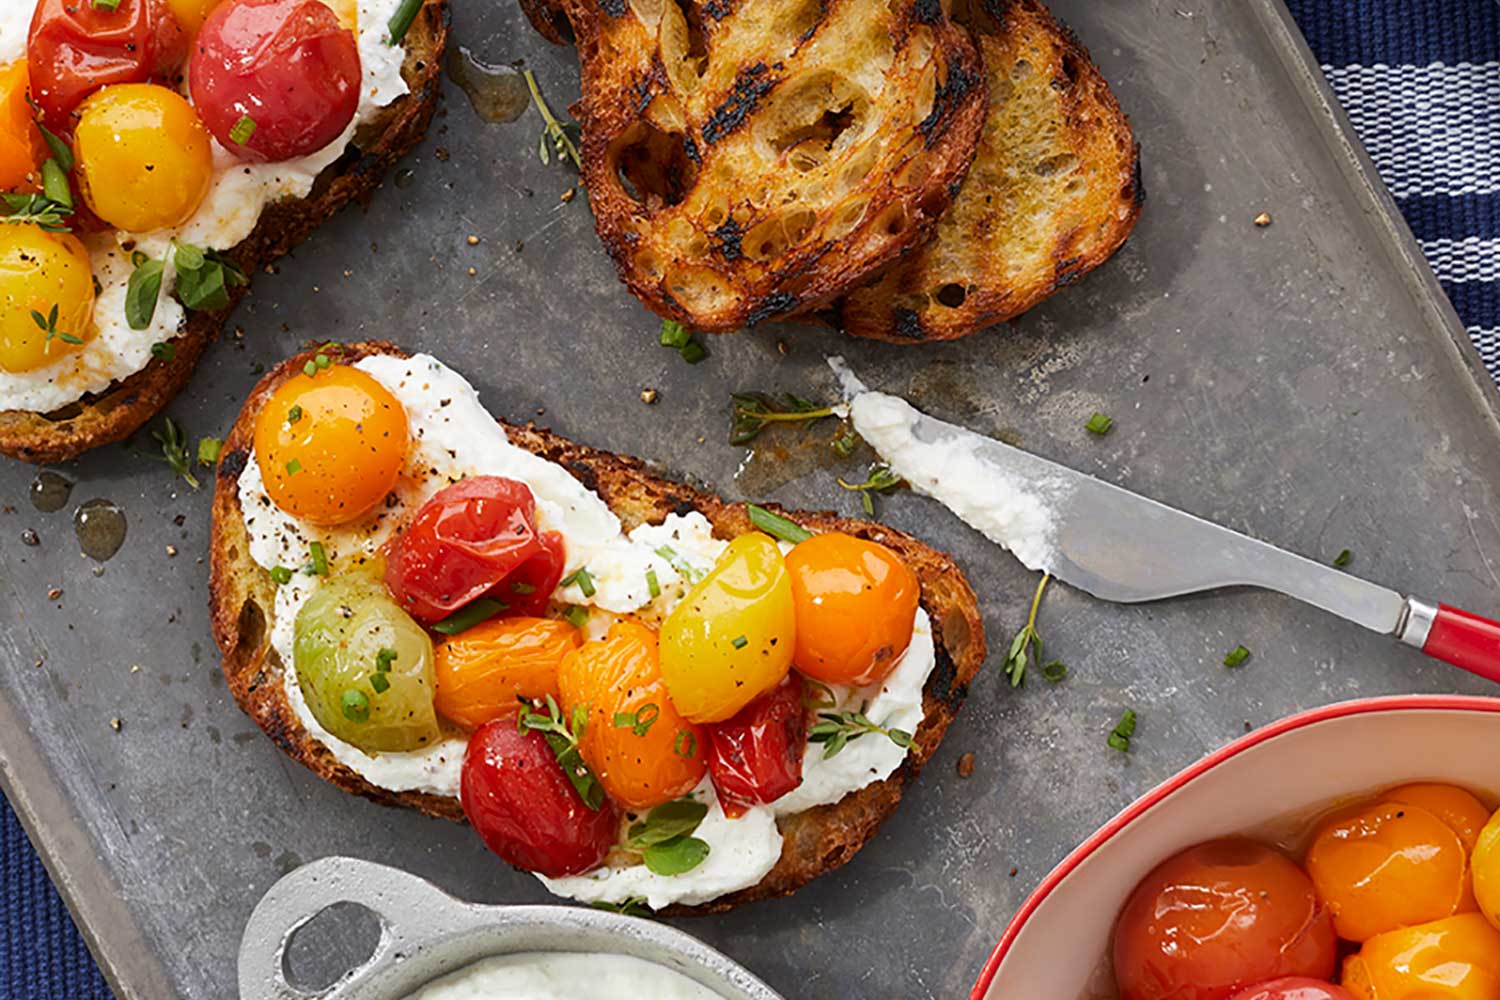 Roasted Cherry Tomatoes & Home-Smoked Ricotta on Grilled Toast